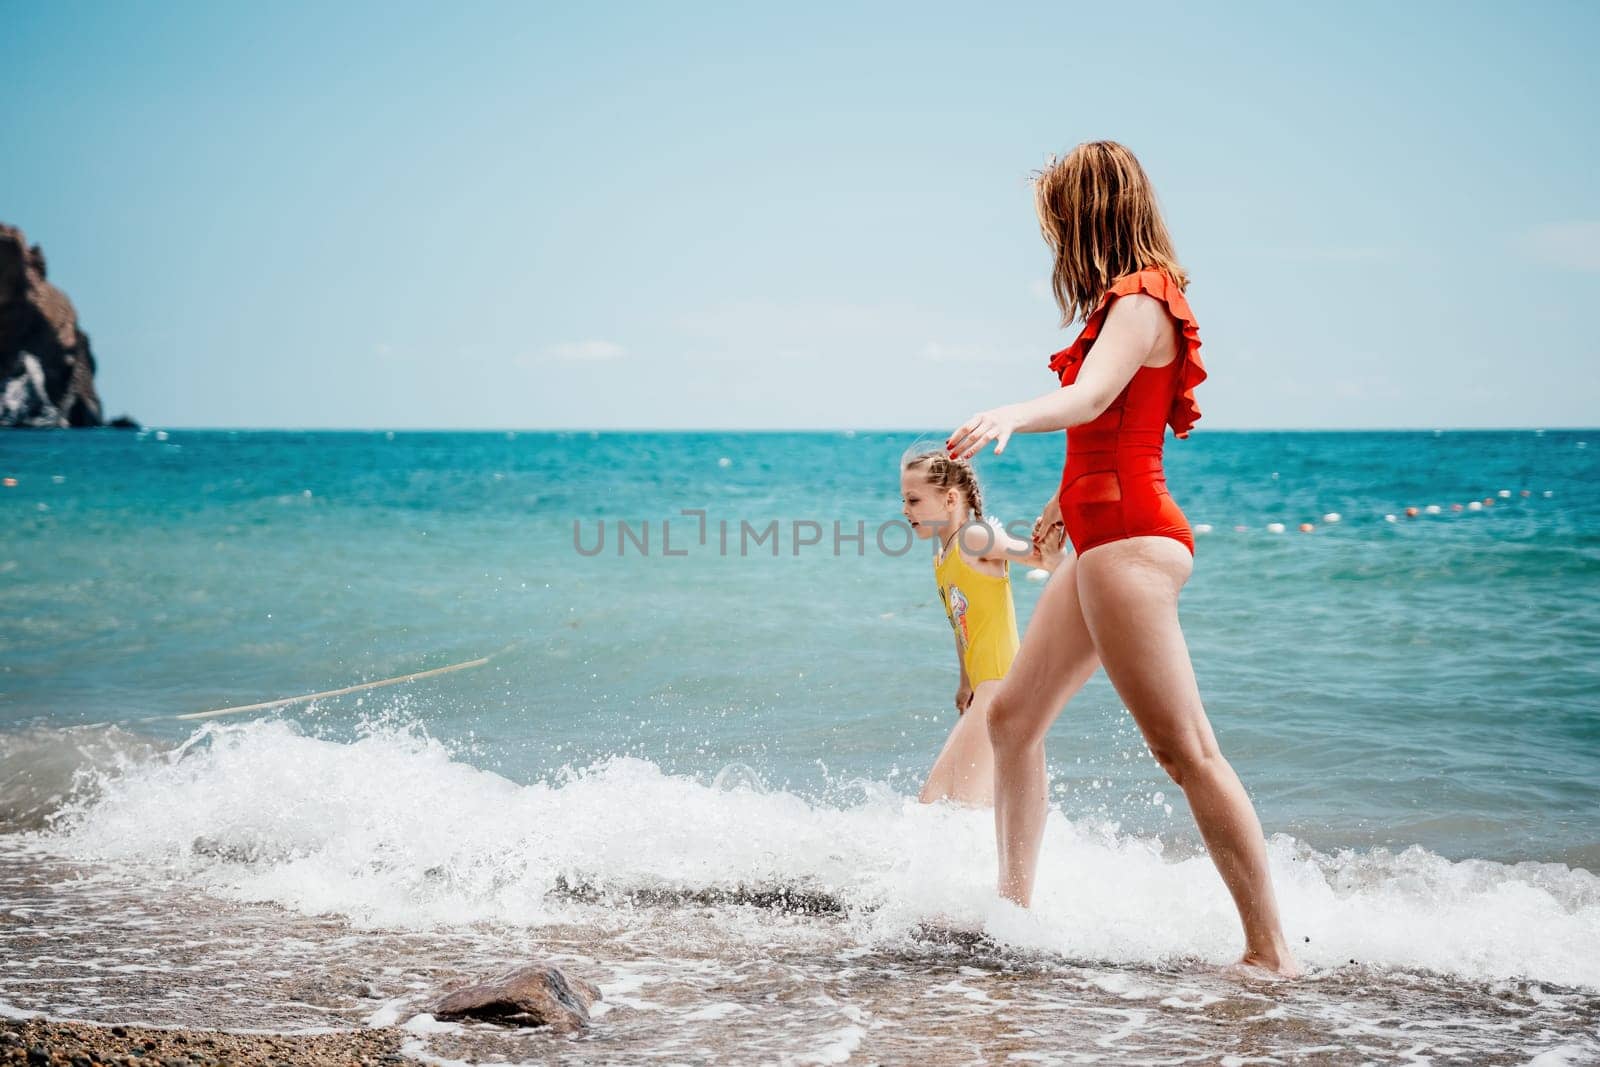 Happy loving family mother and daughter having fun together on the beach. Mum playing with her kid in holiday vacation next to the ocean - Family lifestyle and love concept.